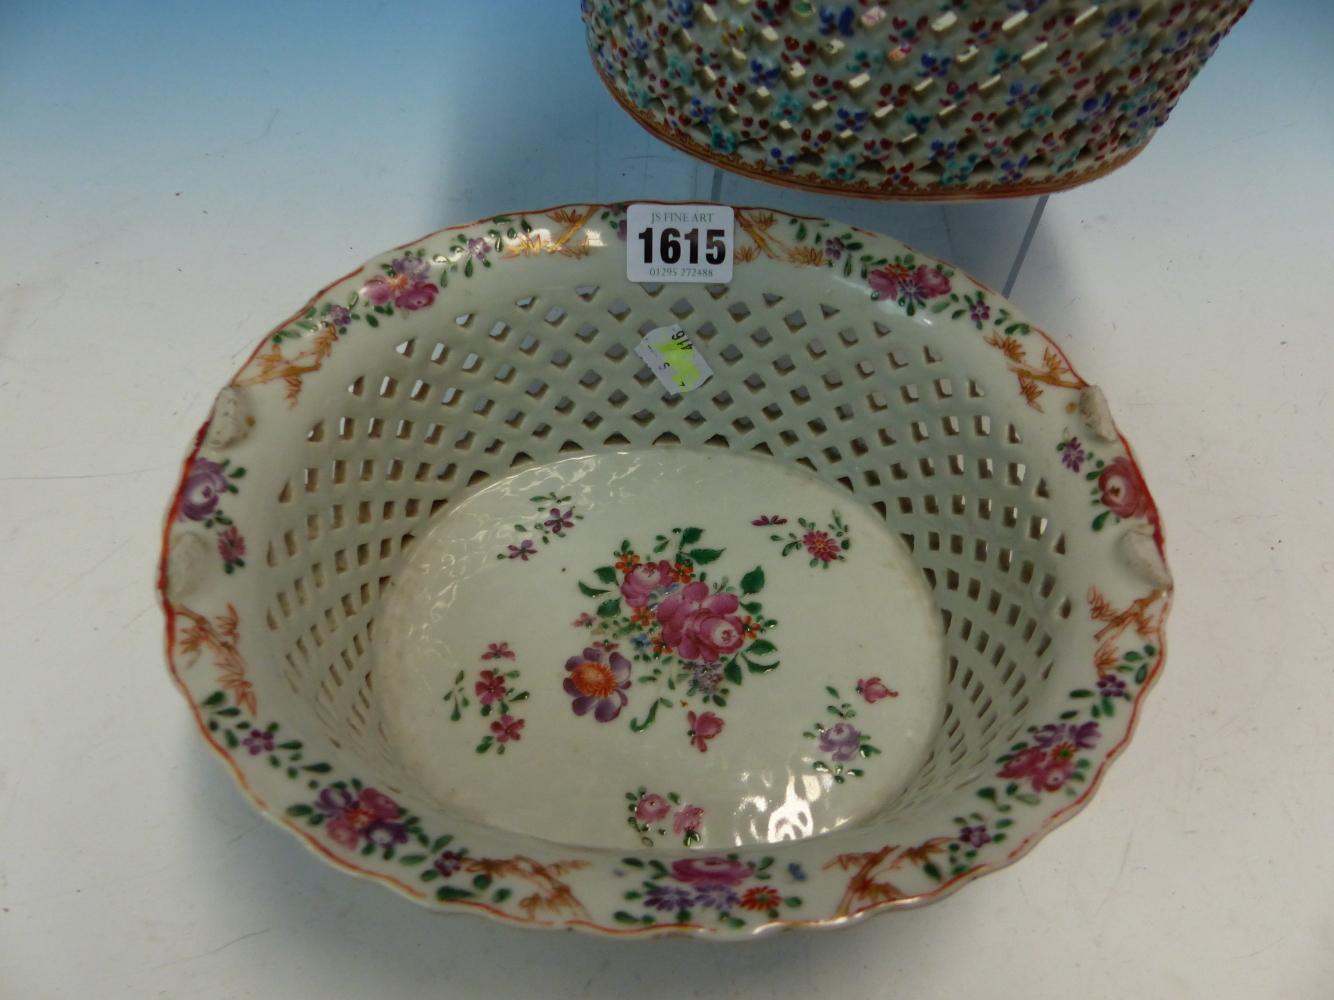 A PAIR OF CHINESE EXPORT BASKETS, THE WAVY RIMS GILT WITH BAMBOO ALTERNATING WITH FAMILLE ROSE - Image 2 of 12